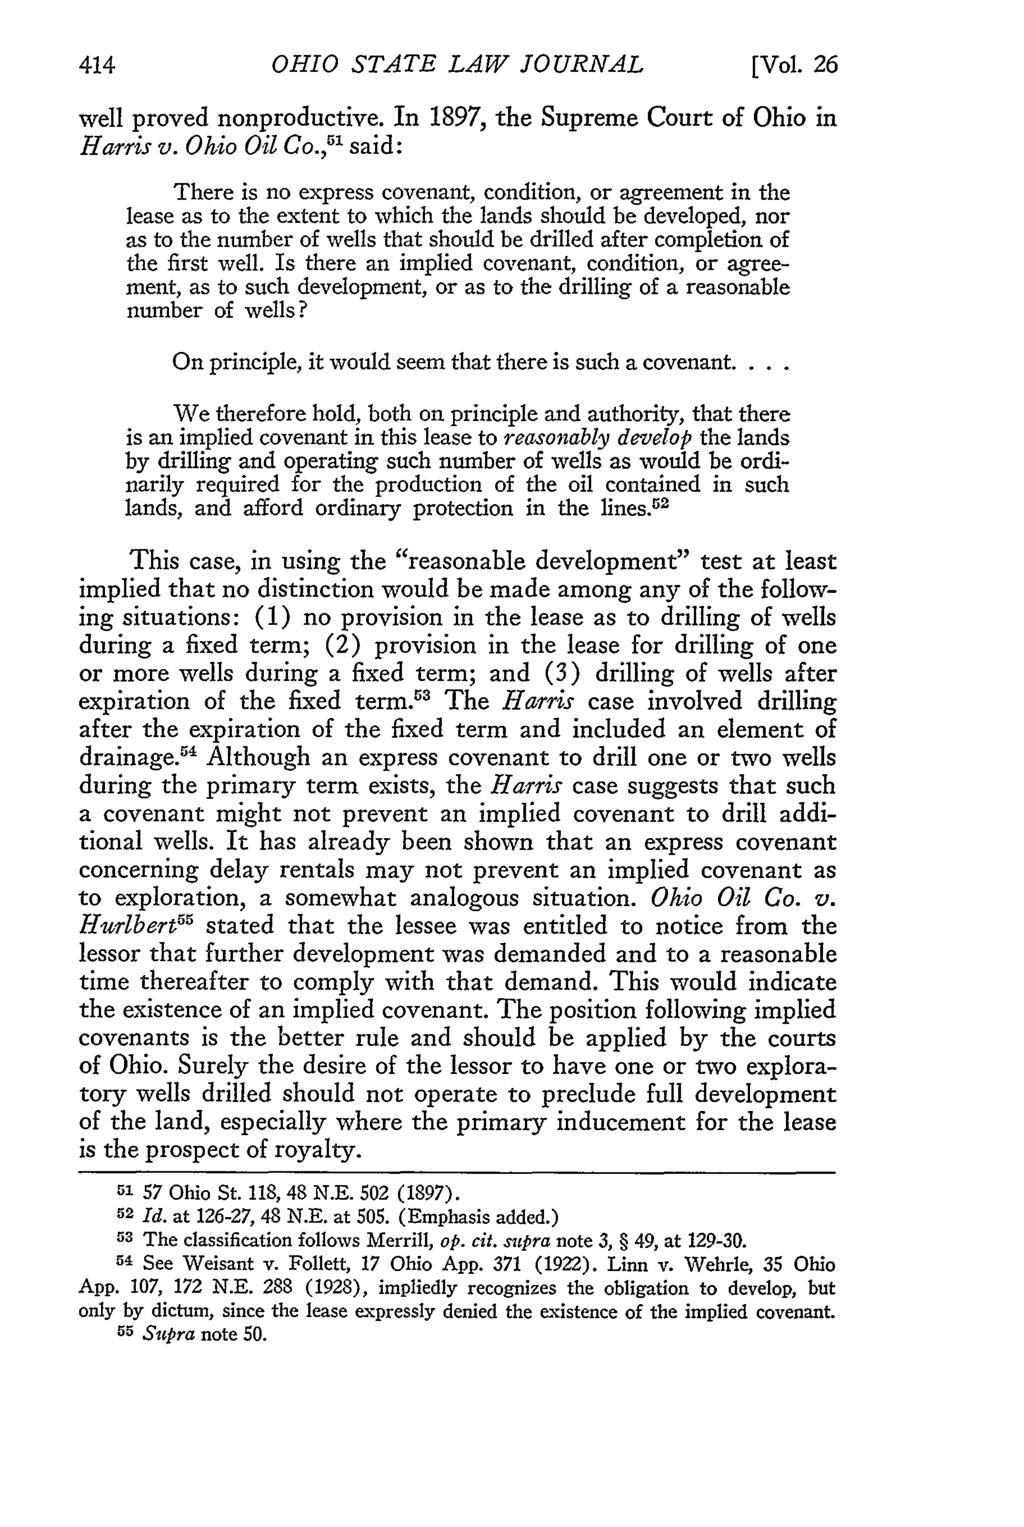 OHIO STATE LAW JOURNAL [Vol. 26 well proved nonproductive. In 1897, the Supreme Court of Ohio in Harris v. Ohio Oil Co.